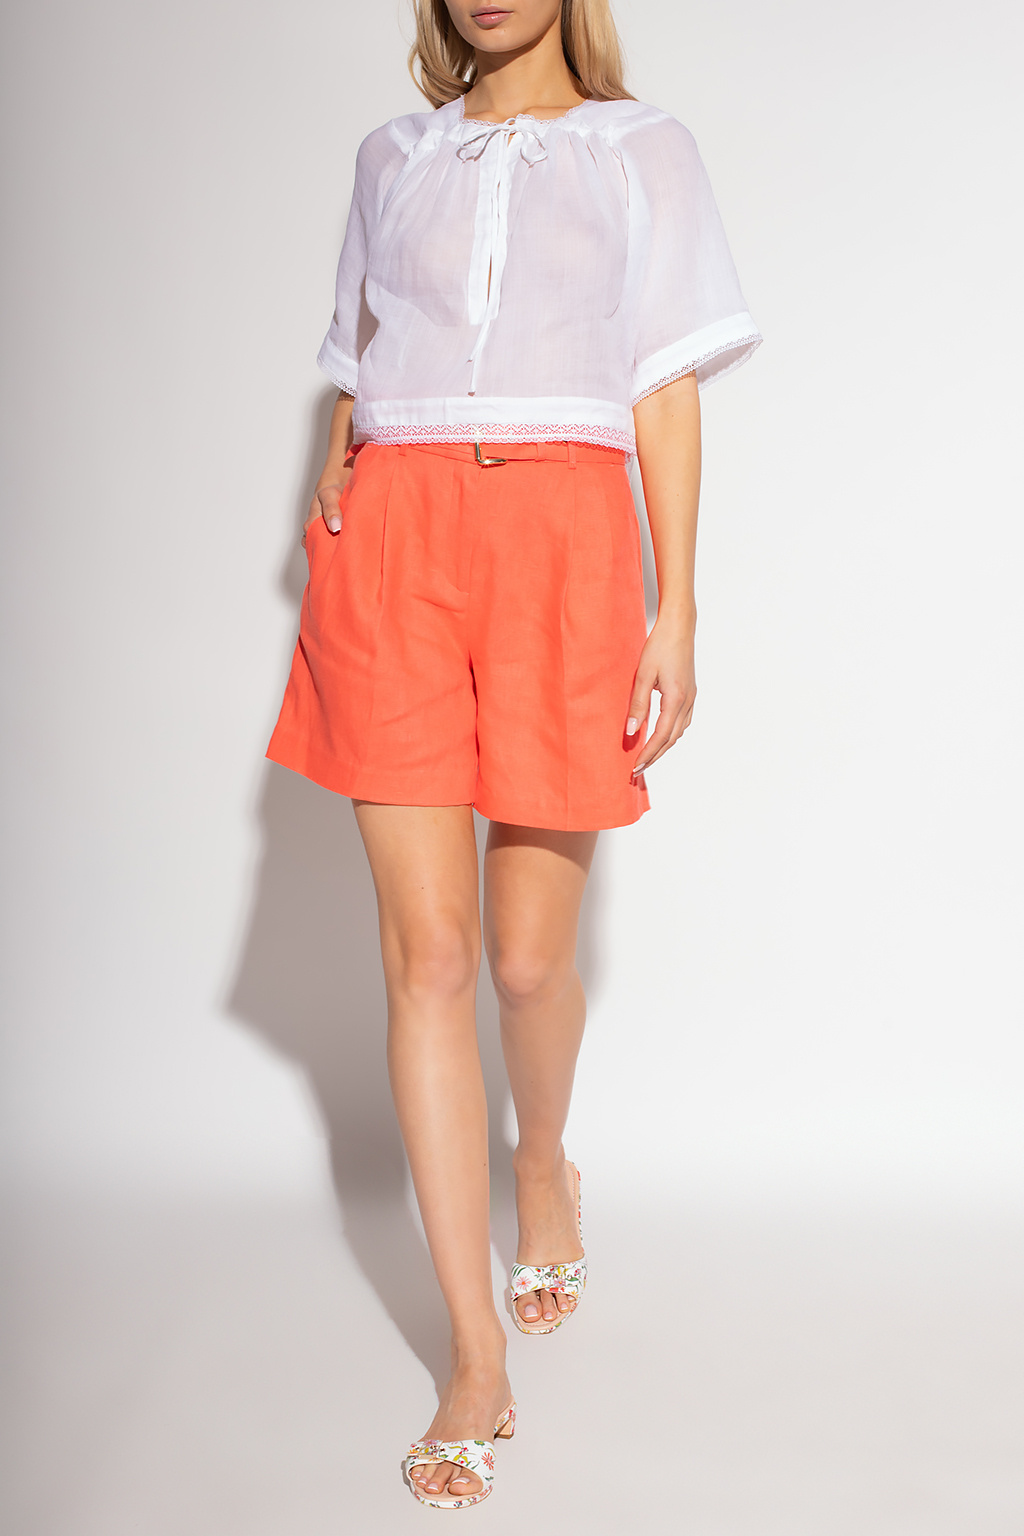 organza dress with cutout detail in white Linen shorts